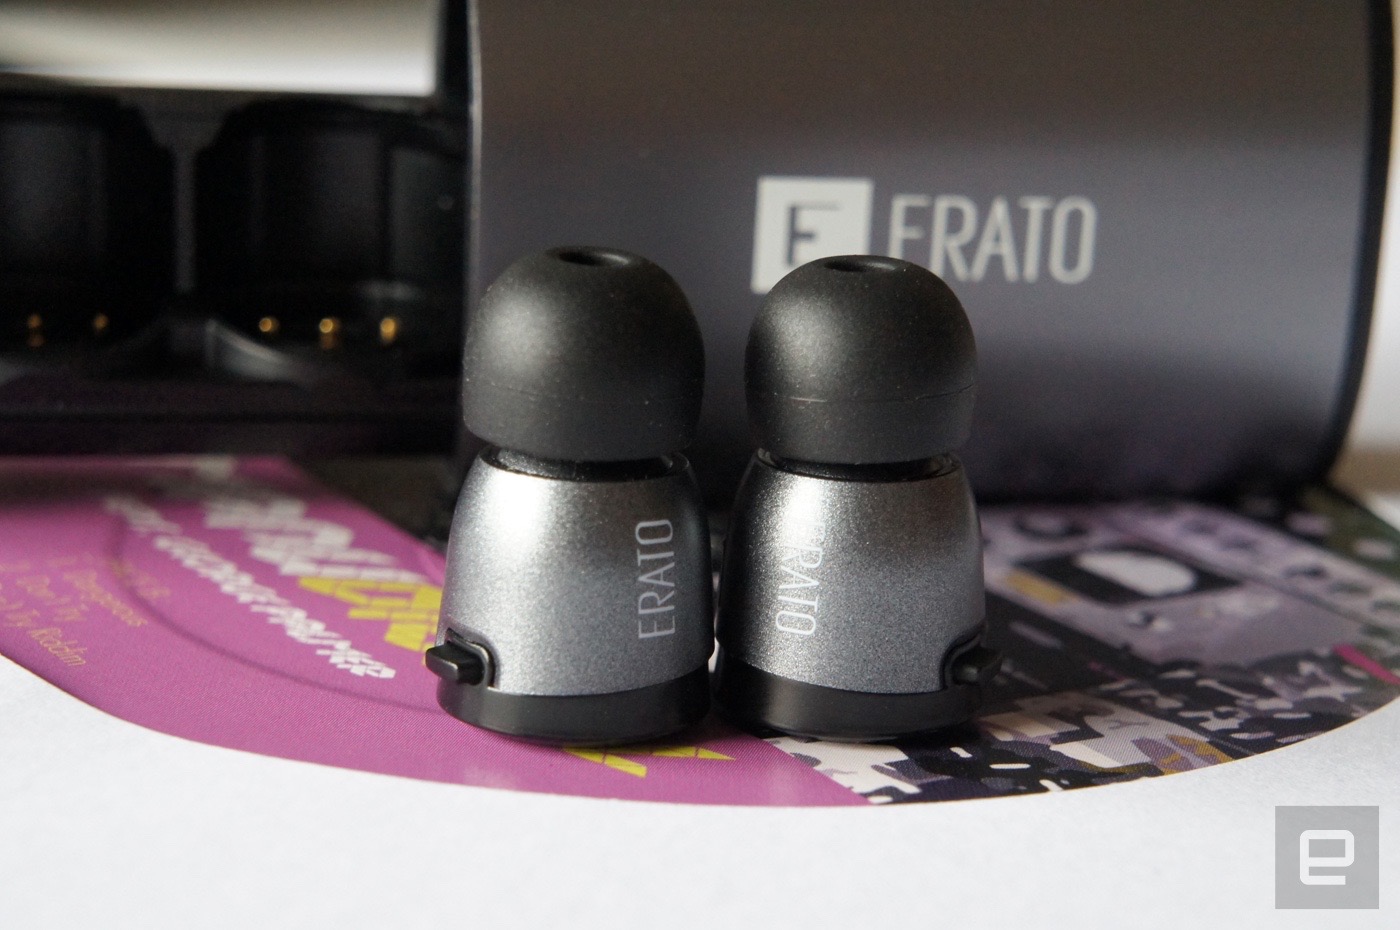 Erato is the next company trying &#039;truly wireless&#039; earbuds